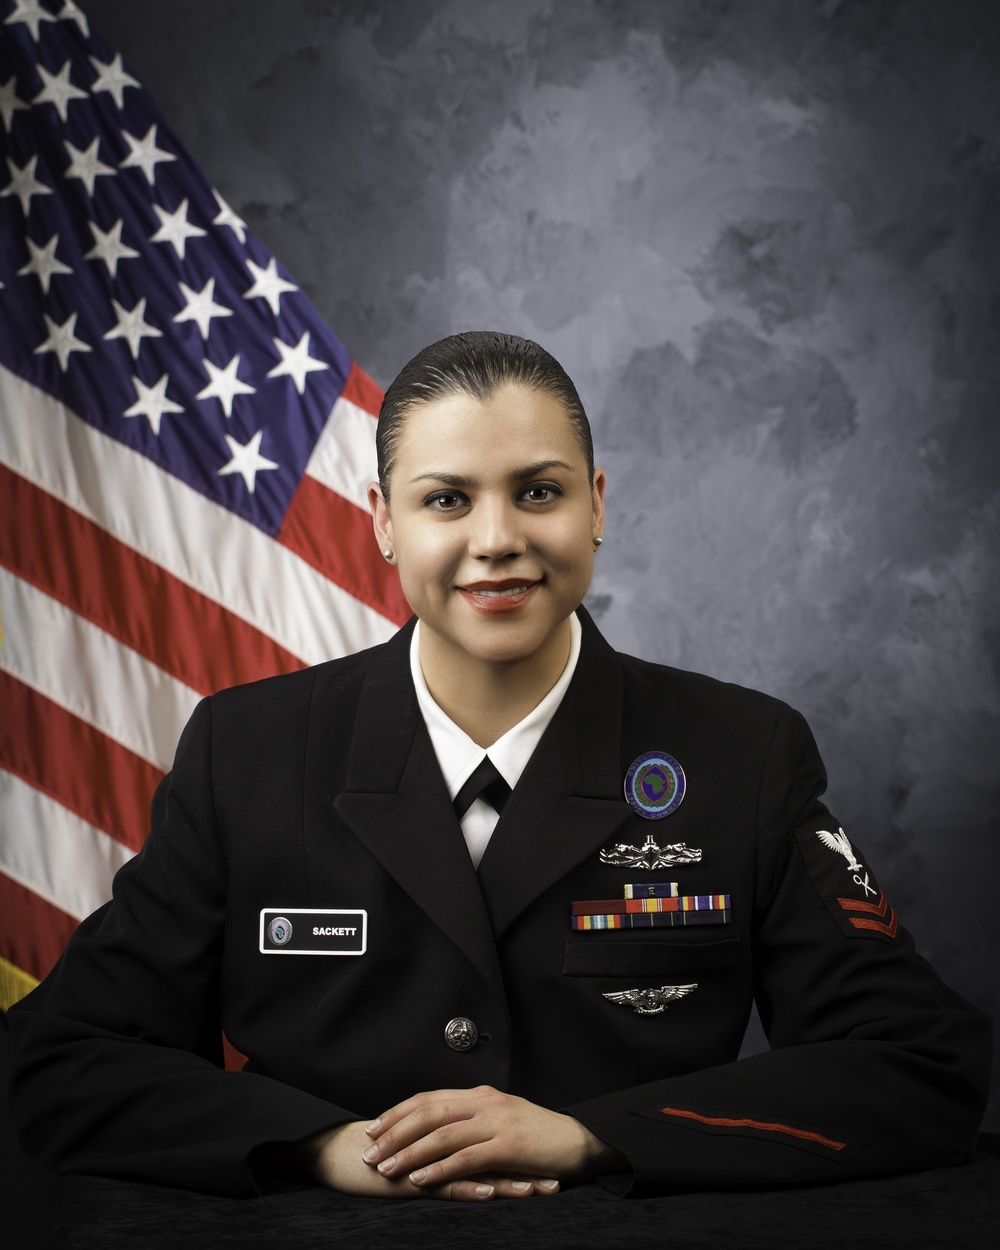 Official portrait, Intelligence Specialist 2nd Class Olivia M. Sackett, United States Naval Reserve